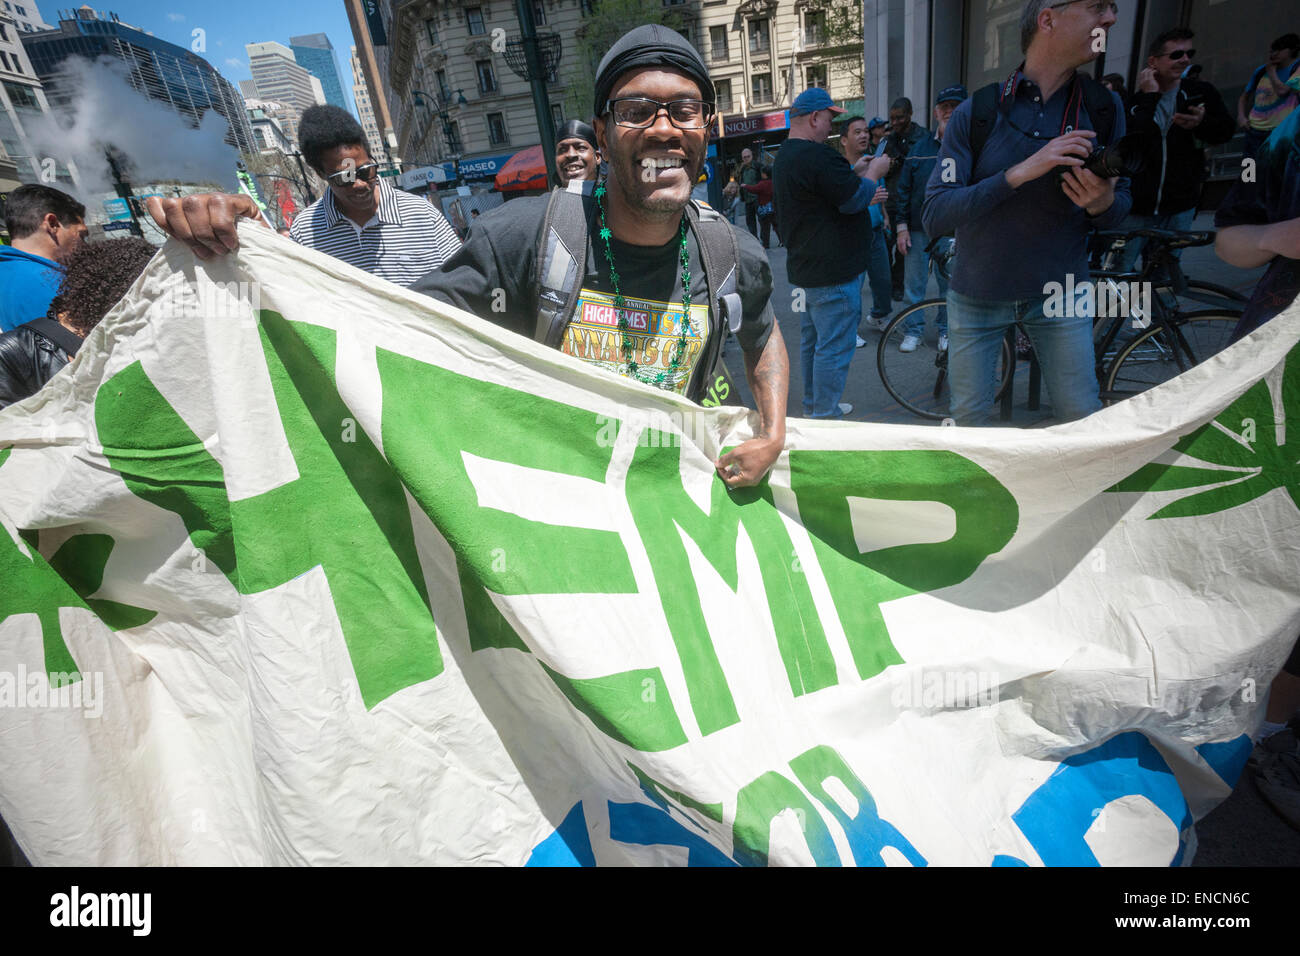 New York, USA. 2nd May, 2015. Advocates for the legalization of marijuana march in New York on Saturday, May 2, 2015 at the annual March For Marijuana. The march included a wide range of demographics from millennials to old-time hippies.  The participants in the parade are calling for the legalization of marijuana for medical treatment and for recreational uses. Credit:  Richard Levine/Alamy Live News Stock Photo